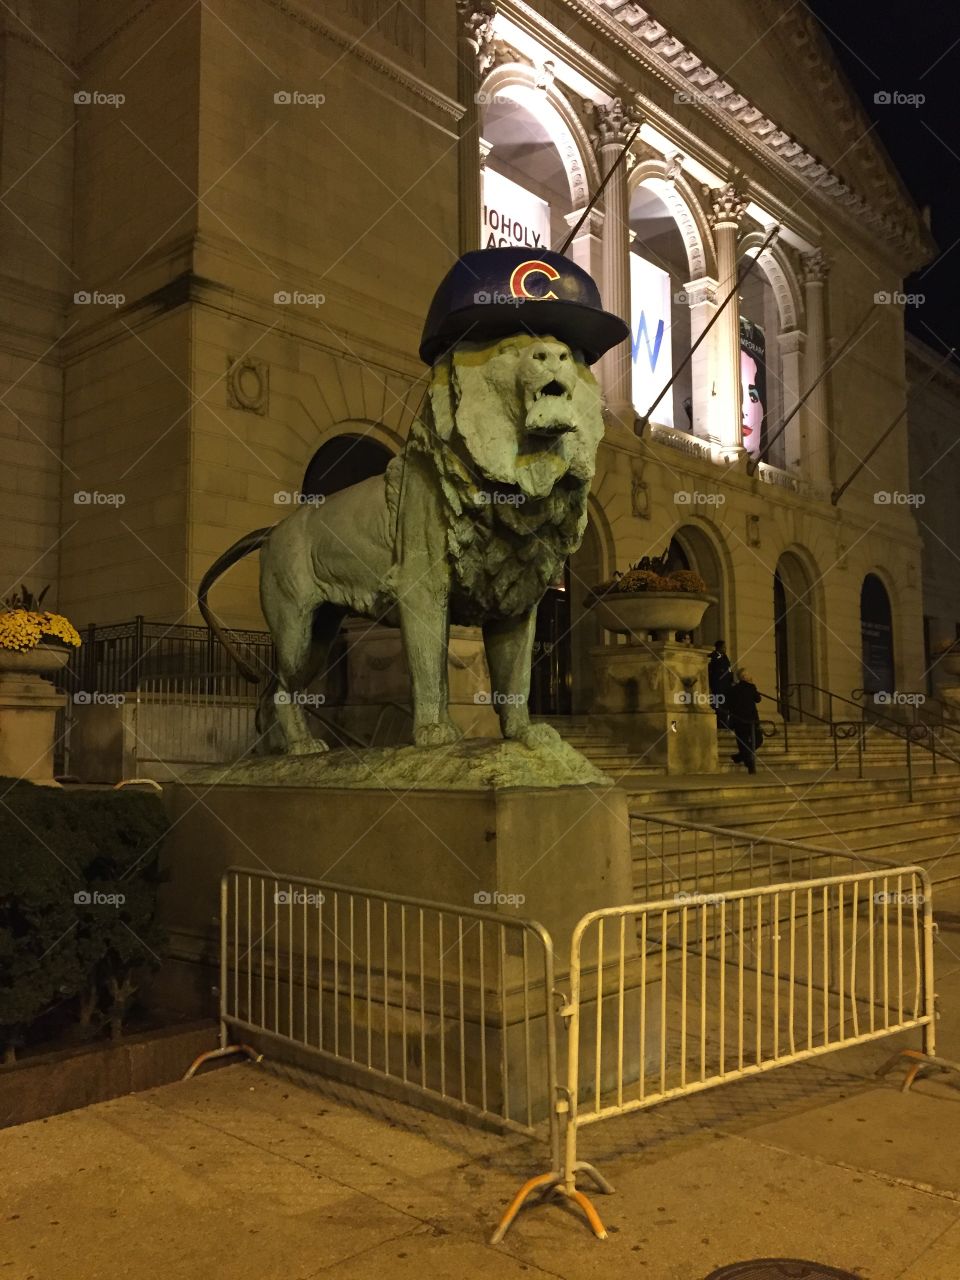 Lion outside of the Art Museum in Chicago wearing Cubs hat